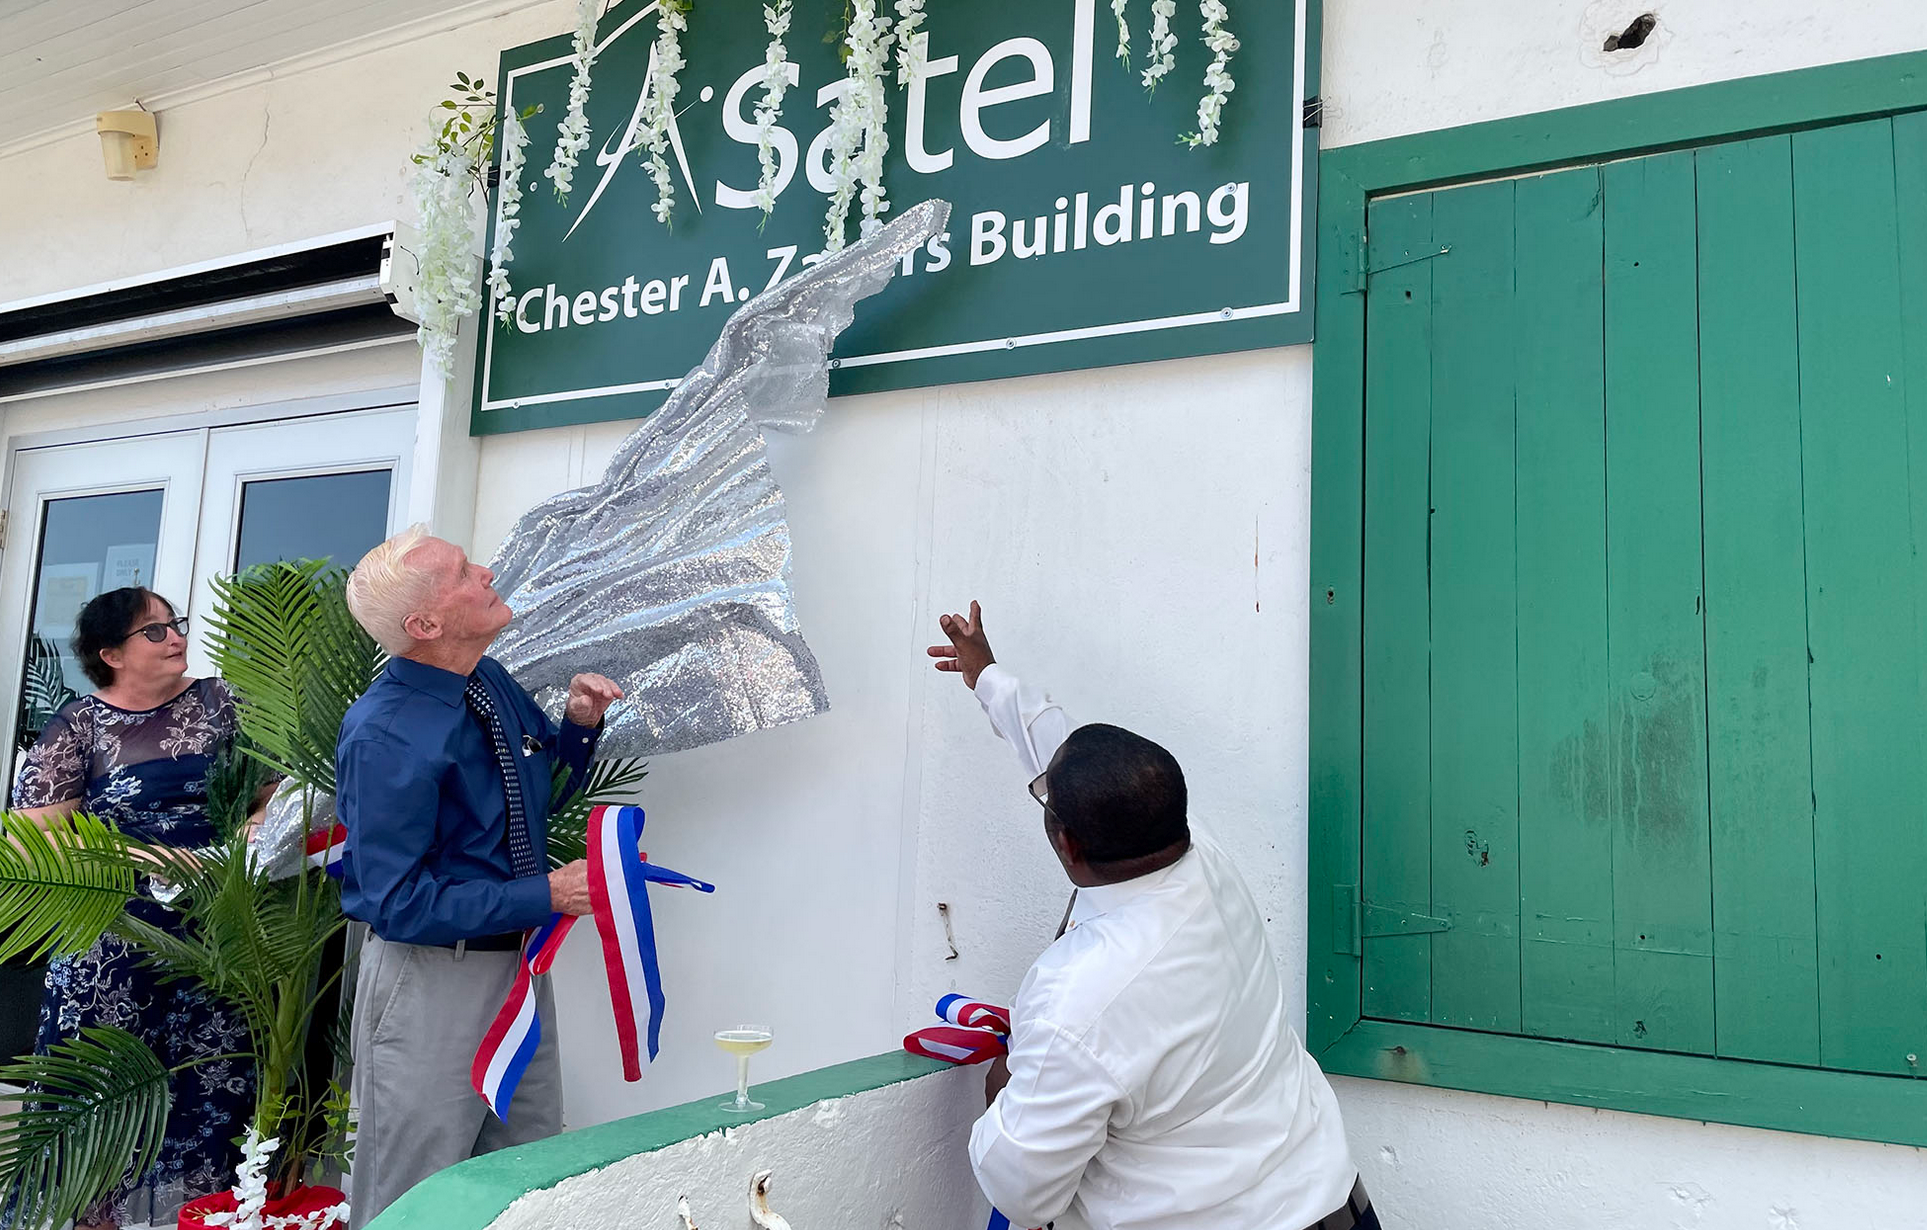 Satel renames building after Chester Zagers